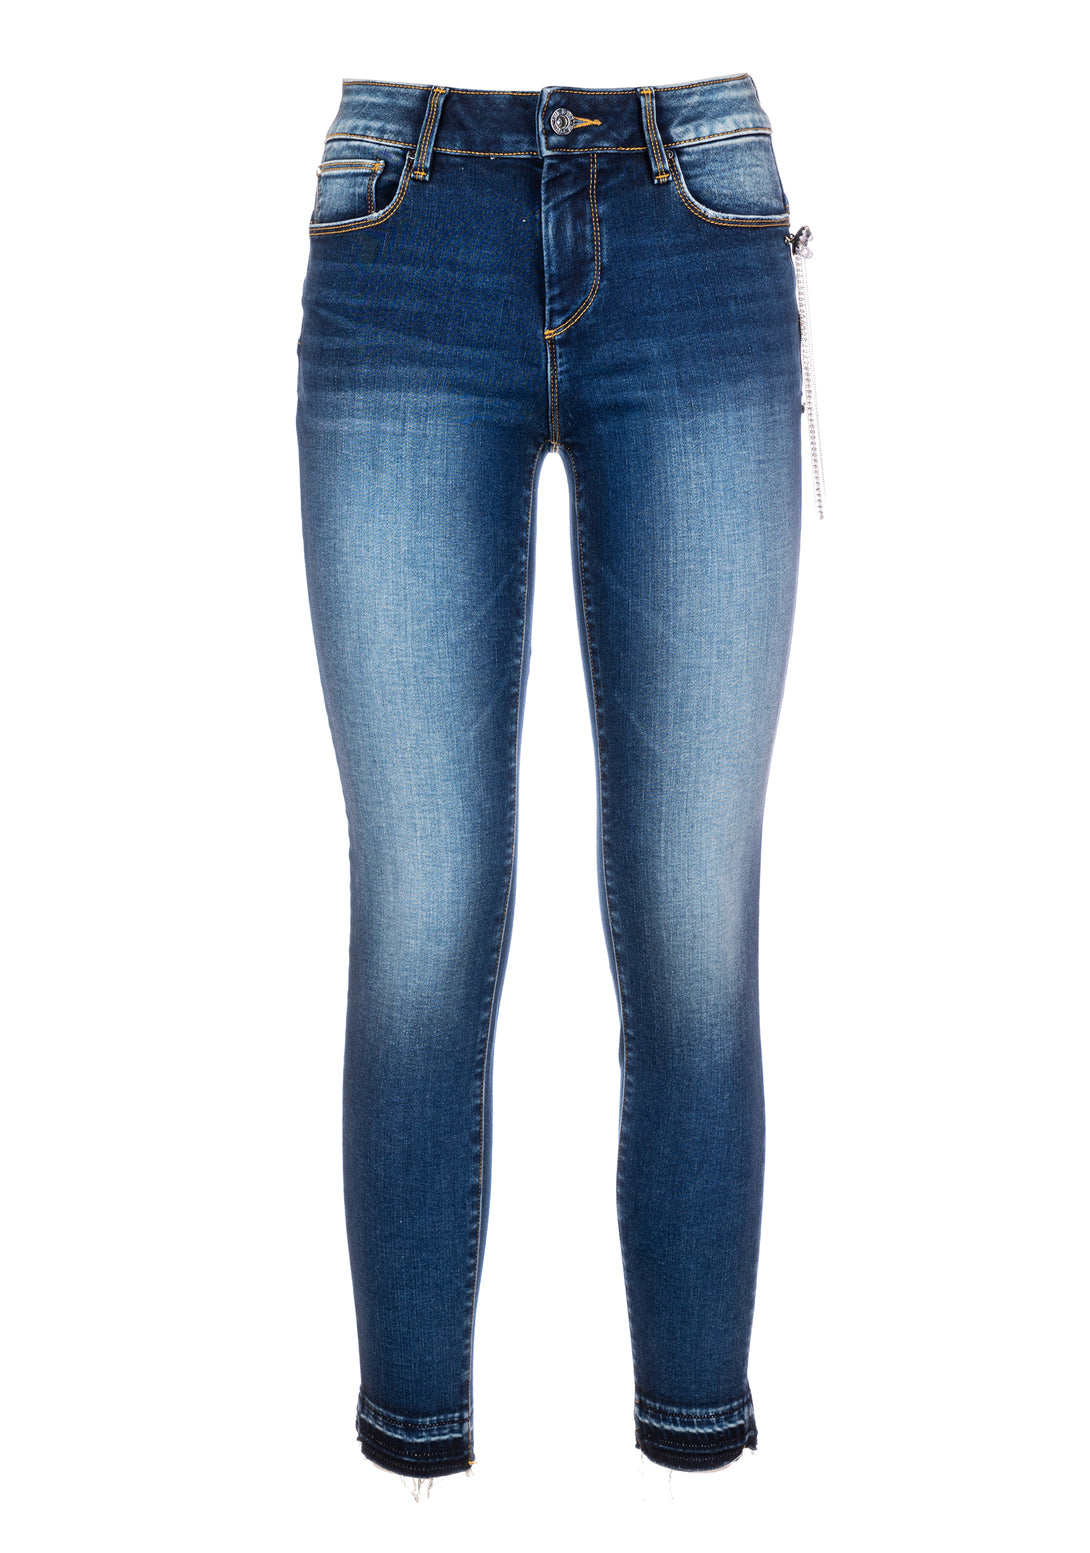 Jeans slim effetto push up in denim con lavaggio strong FR23WV8000D40102 Fracomina